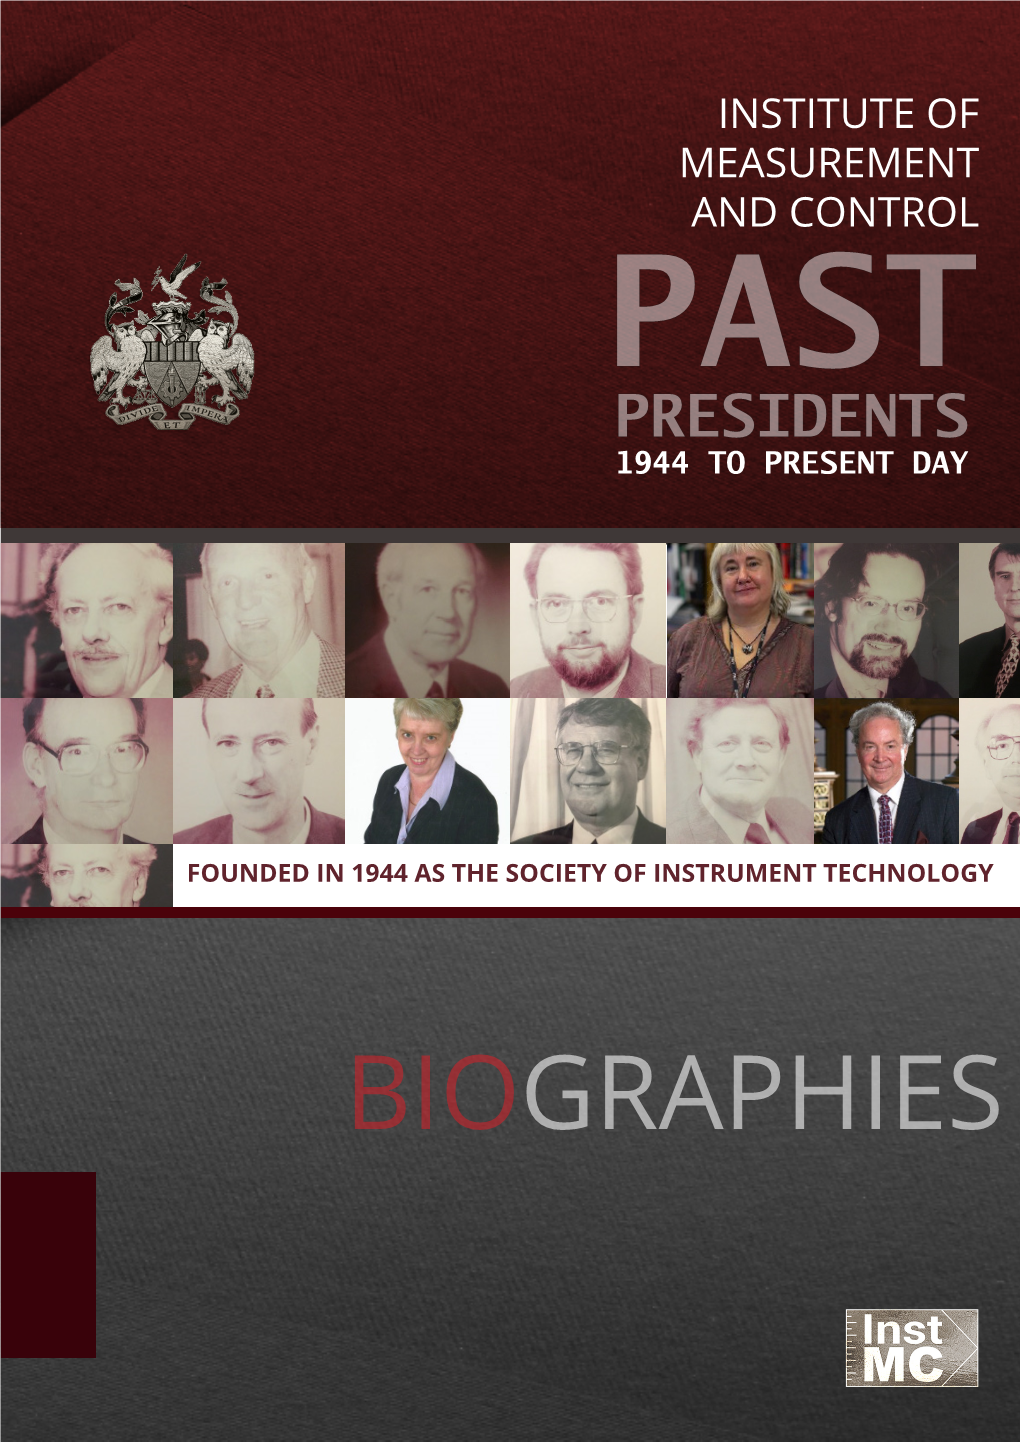 Presidents 1944 to Present Day